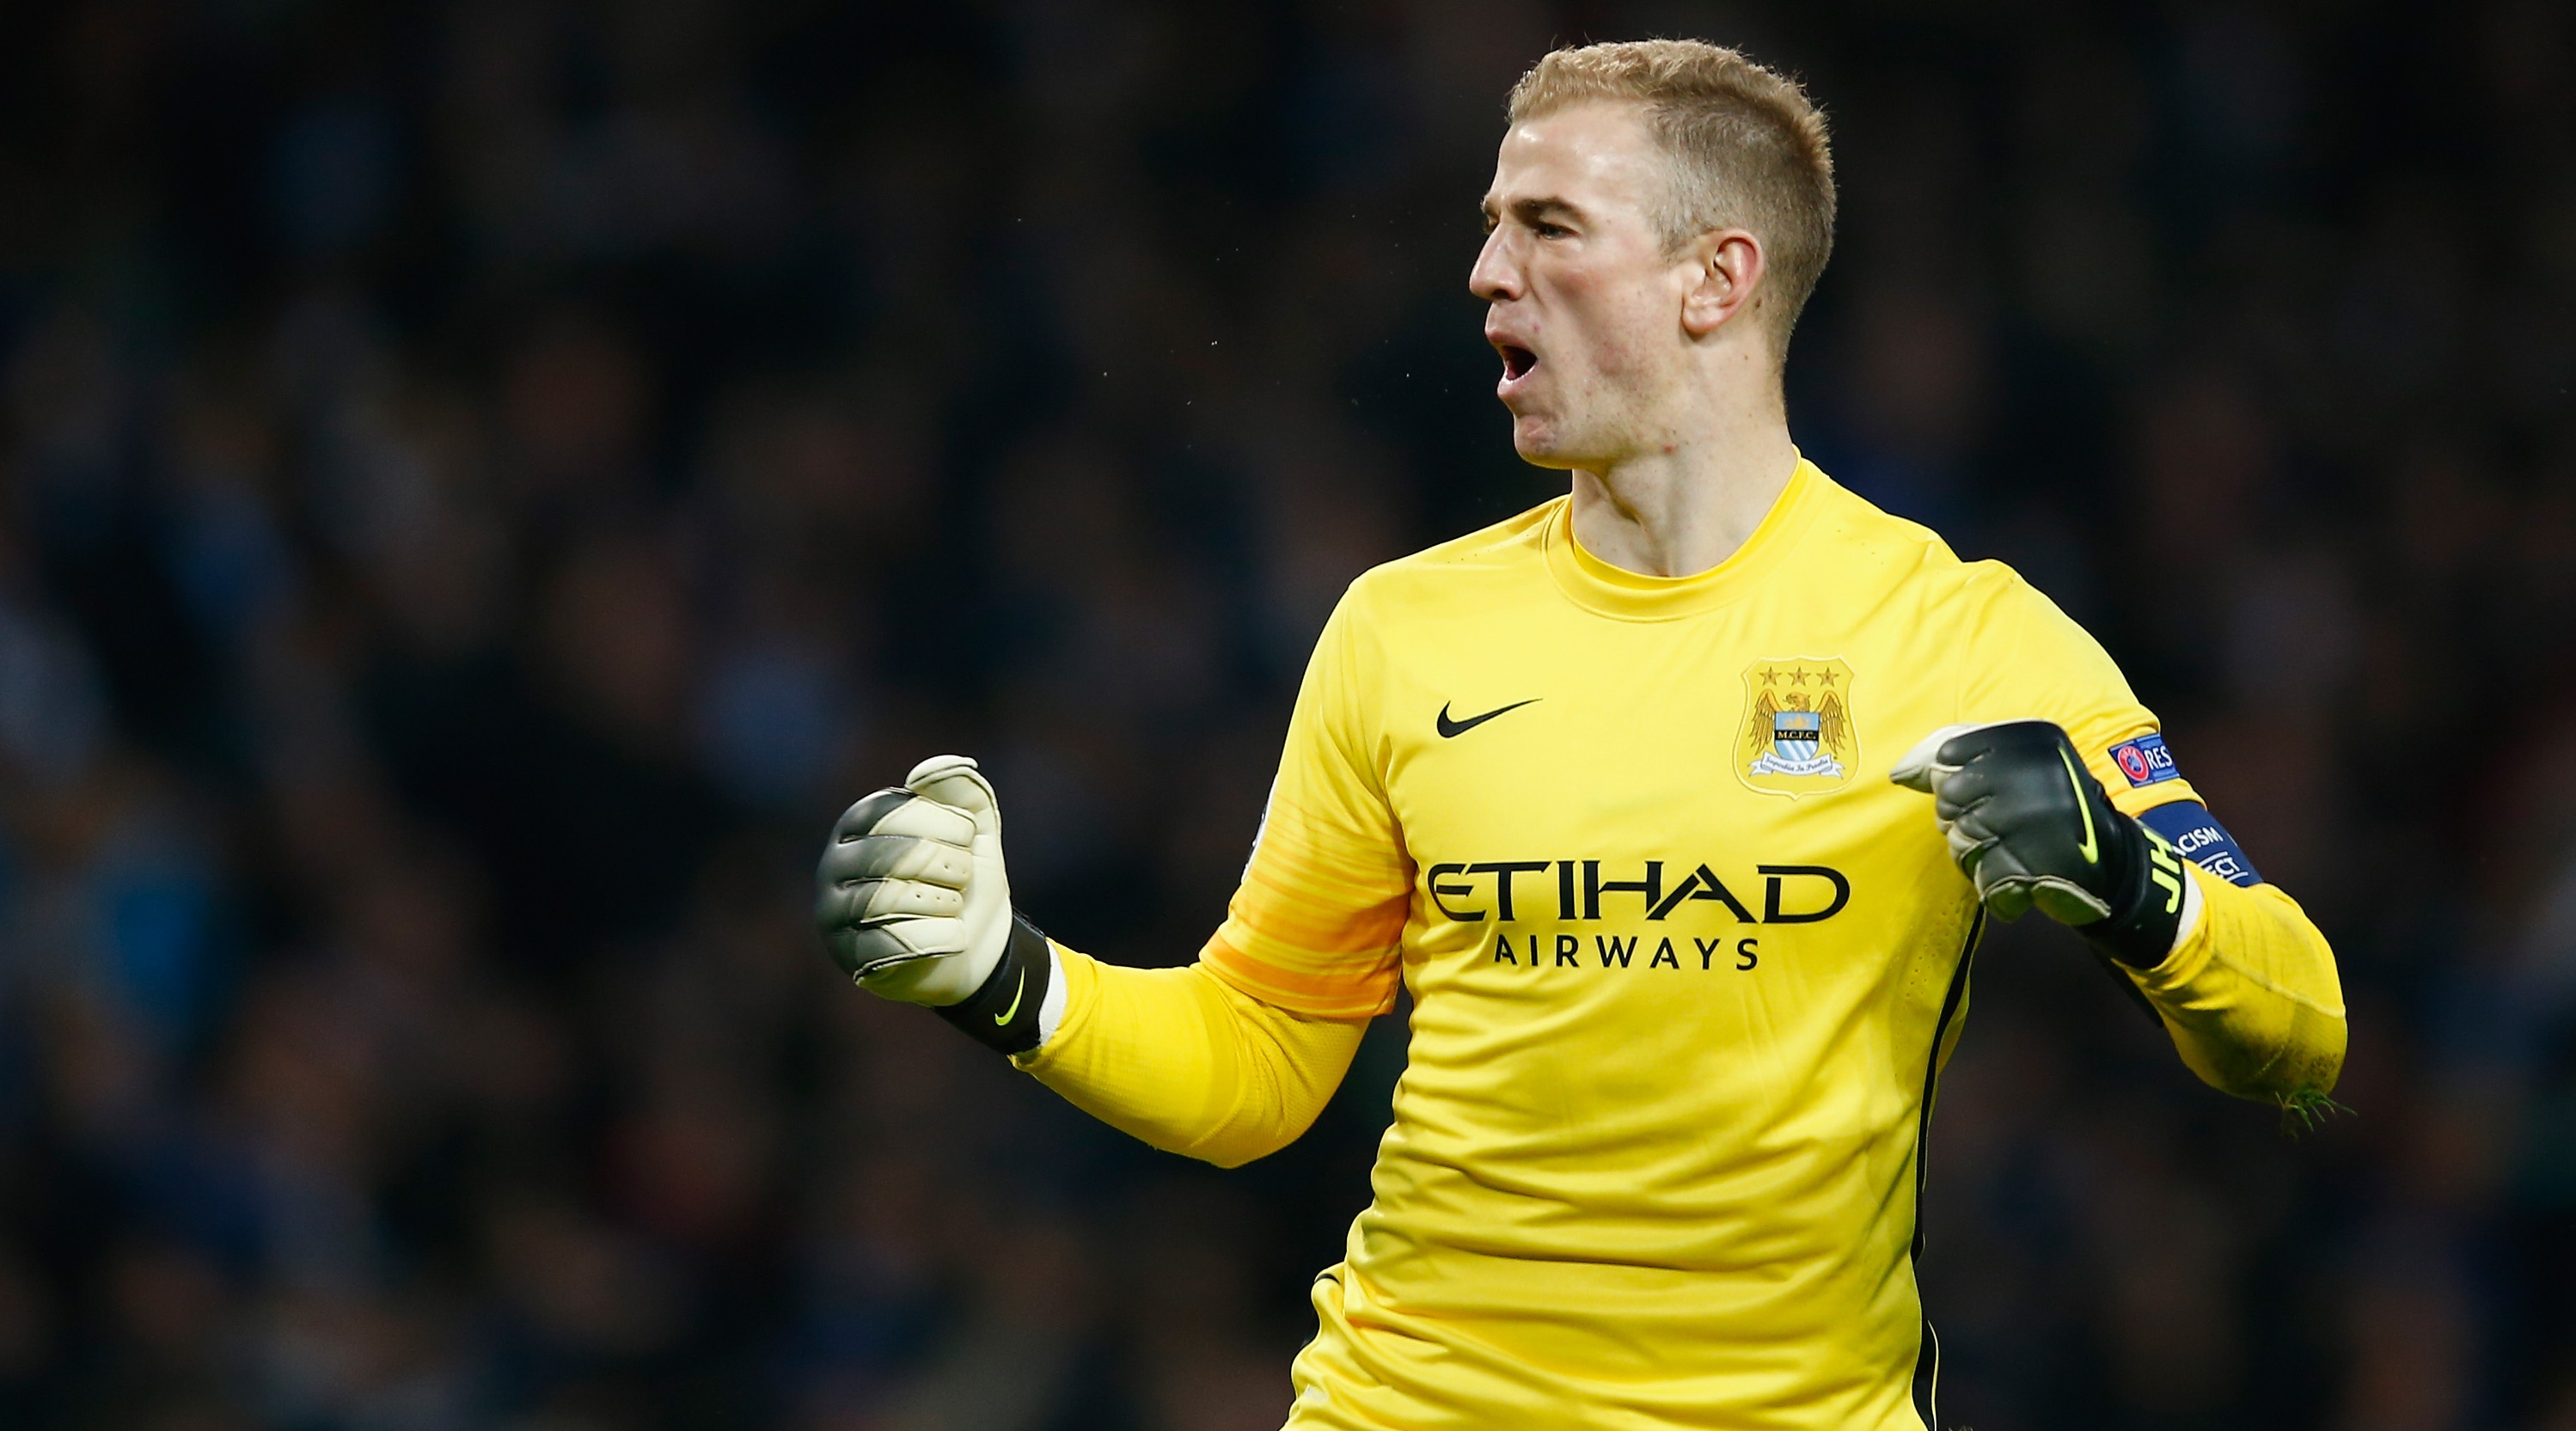 MANCHESTER, ENGLAND - APRIL 12: Joe Hart of Man City celebrates them winning a penalty decision during the UEFA Champions League Quarter Final second leg match between Manchester City FC and Paris Saint-Germain at the Etihad Stadium on April 12, 2016 in Manchester, United Kingdom. (Photo by Christopher Lee - UEFA/UEFA via Getty Images)